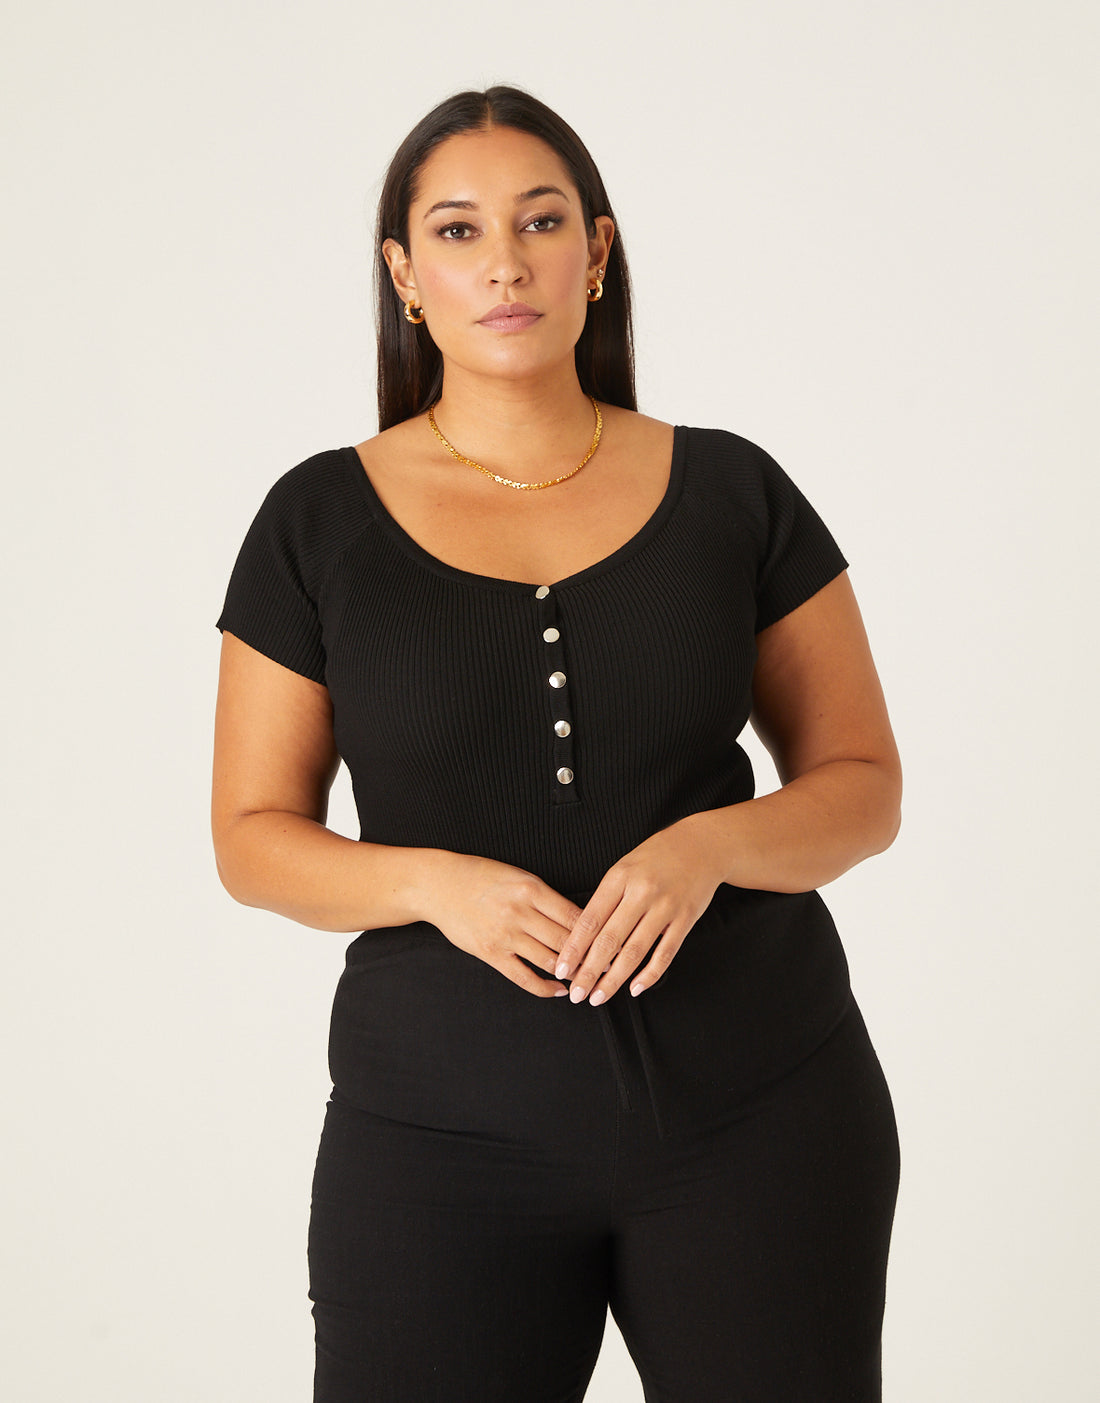 Curve Ribbed Snap Bodysuit Plus Size Tops -2020AVE